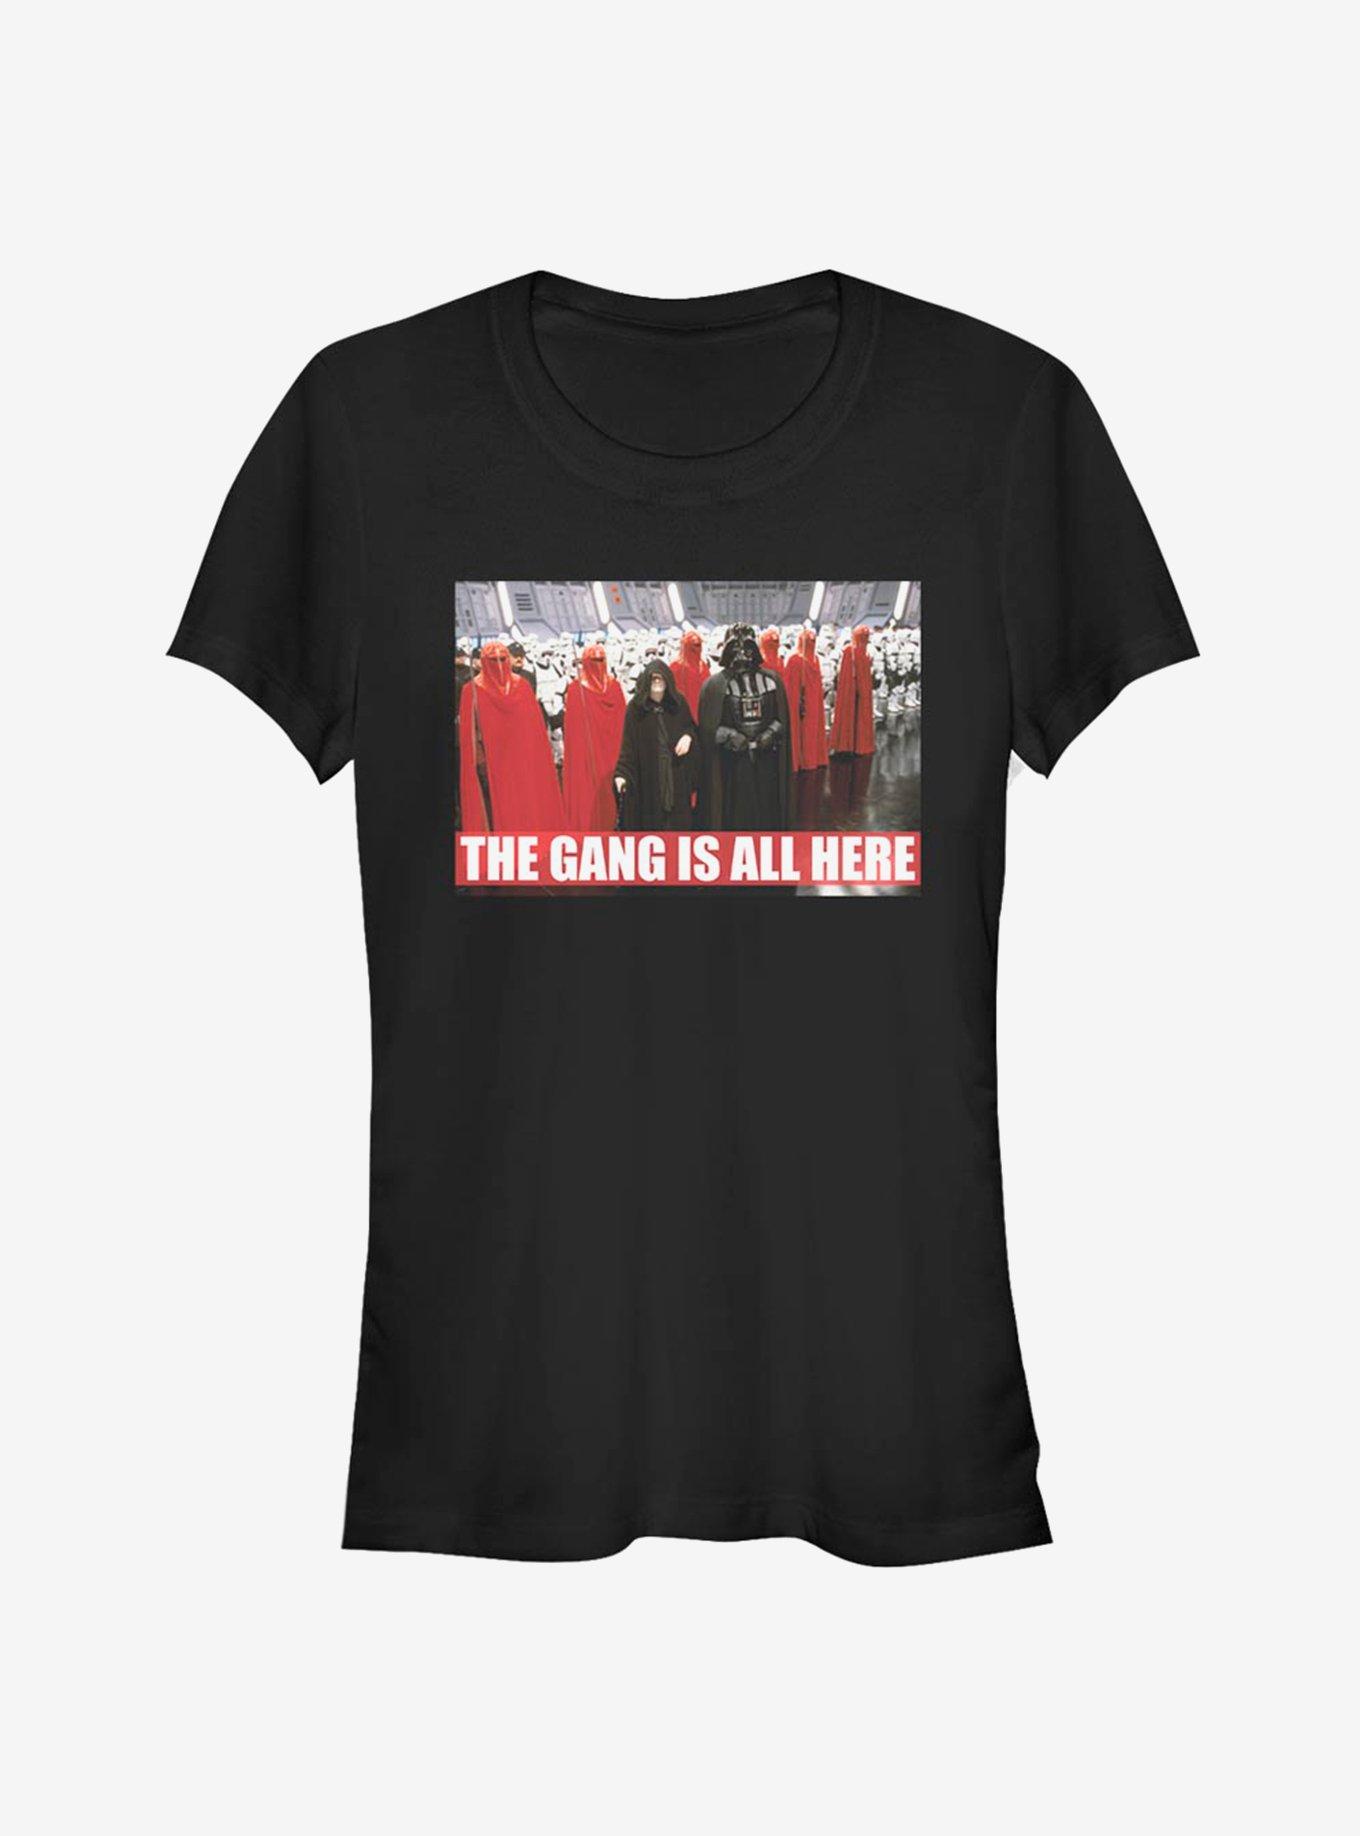 Star Wars The Gang Is All Here Girls T-Shirt